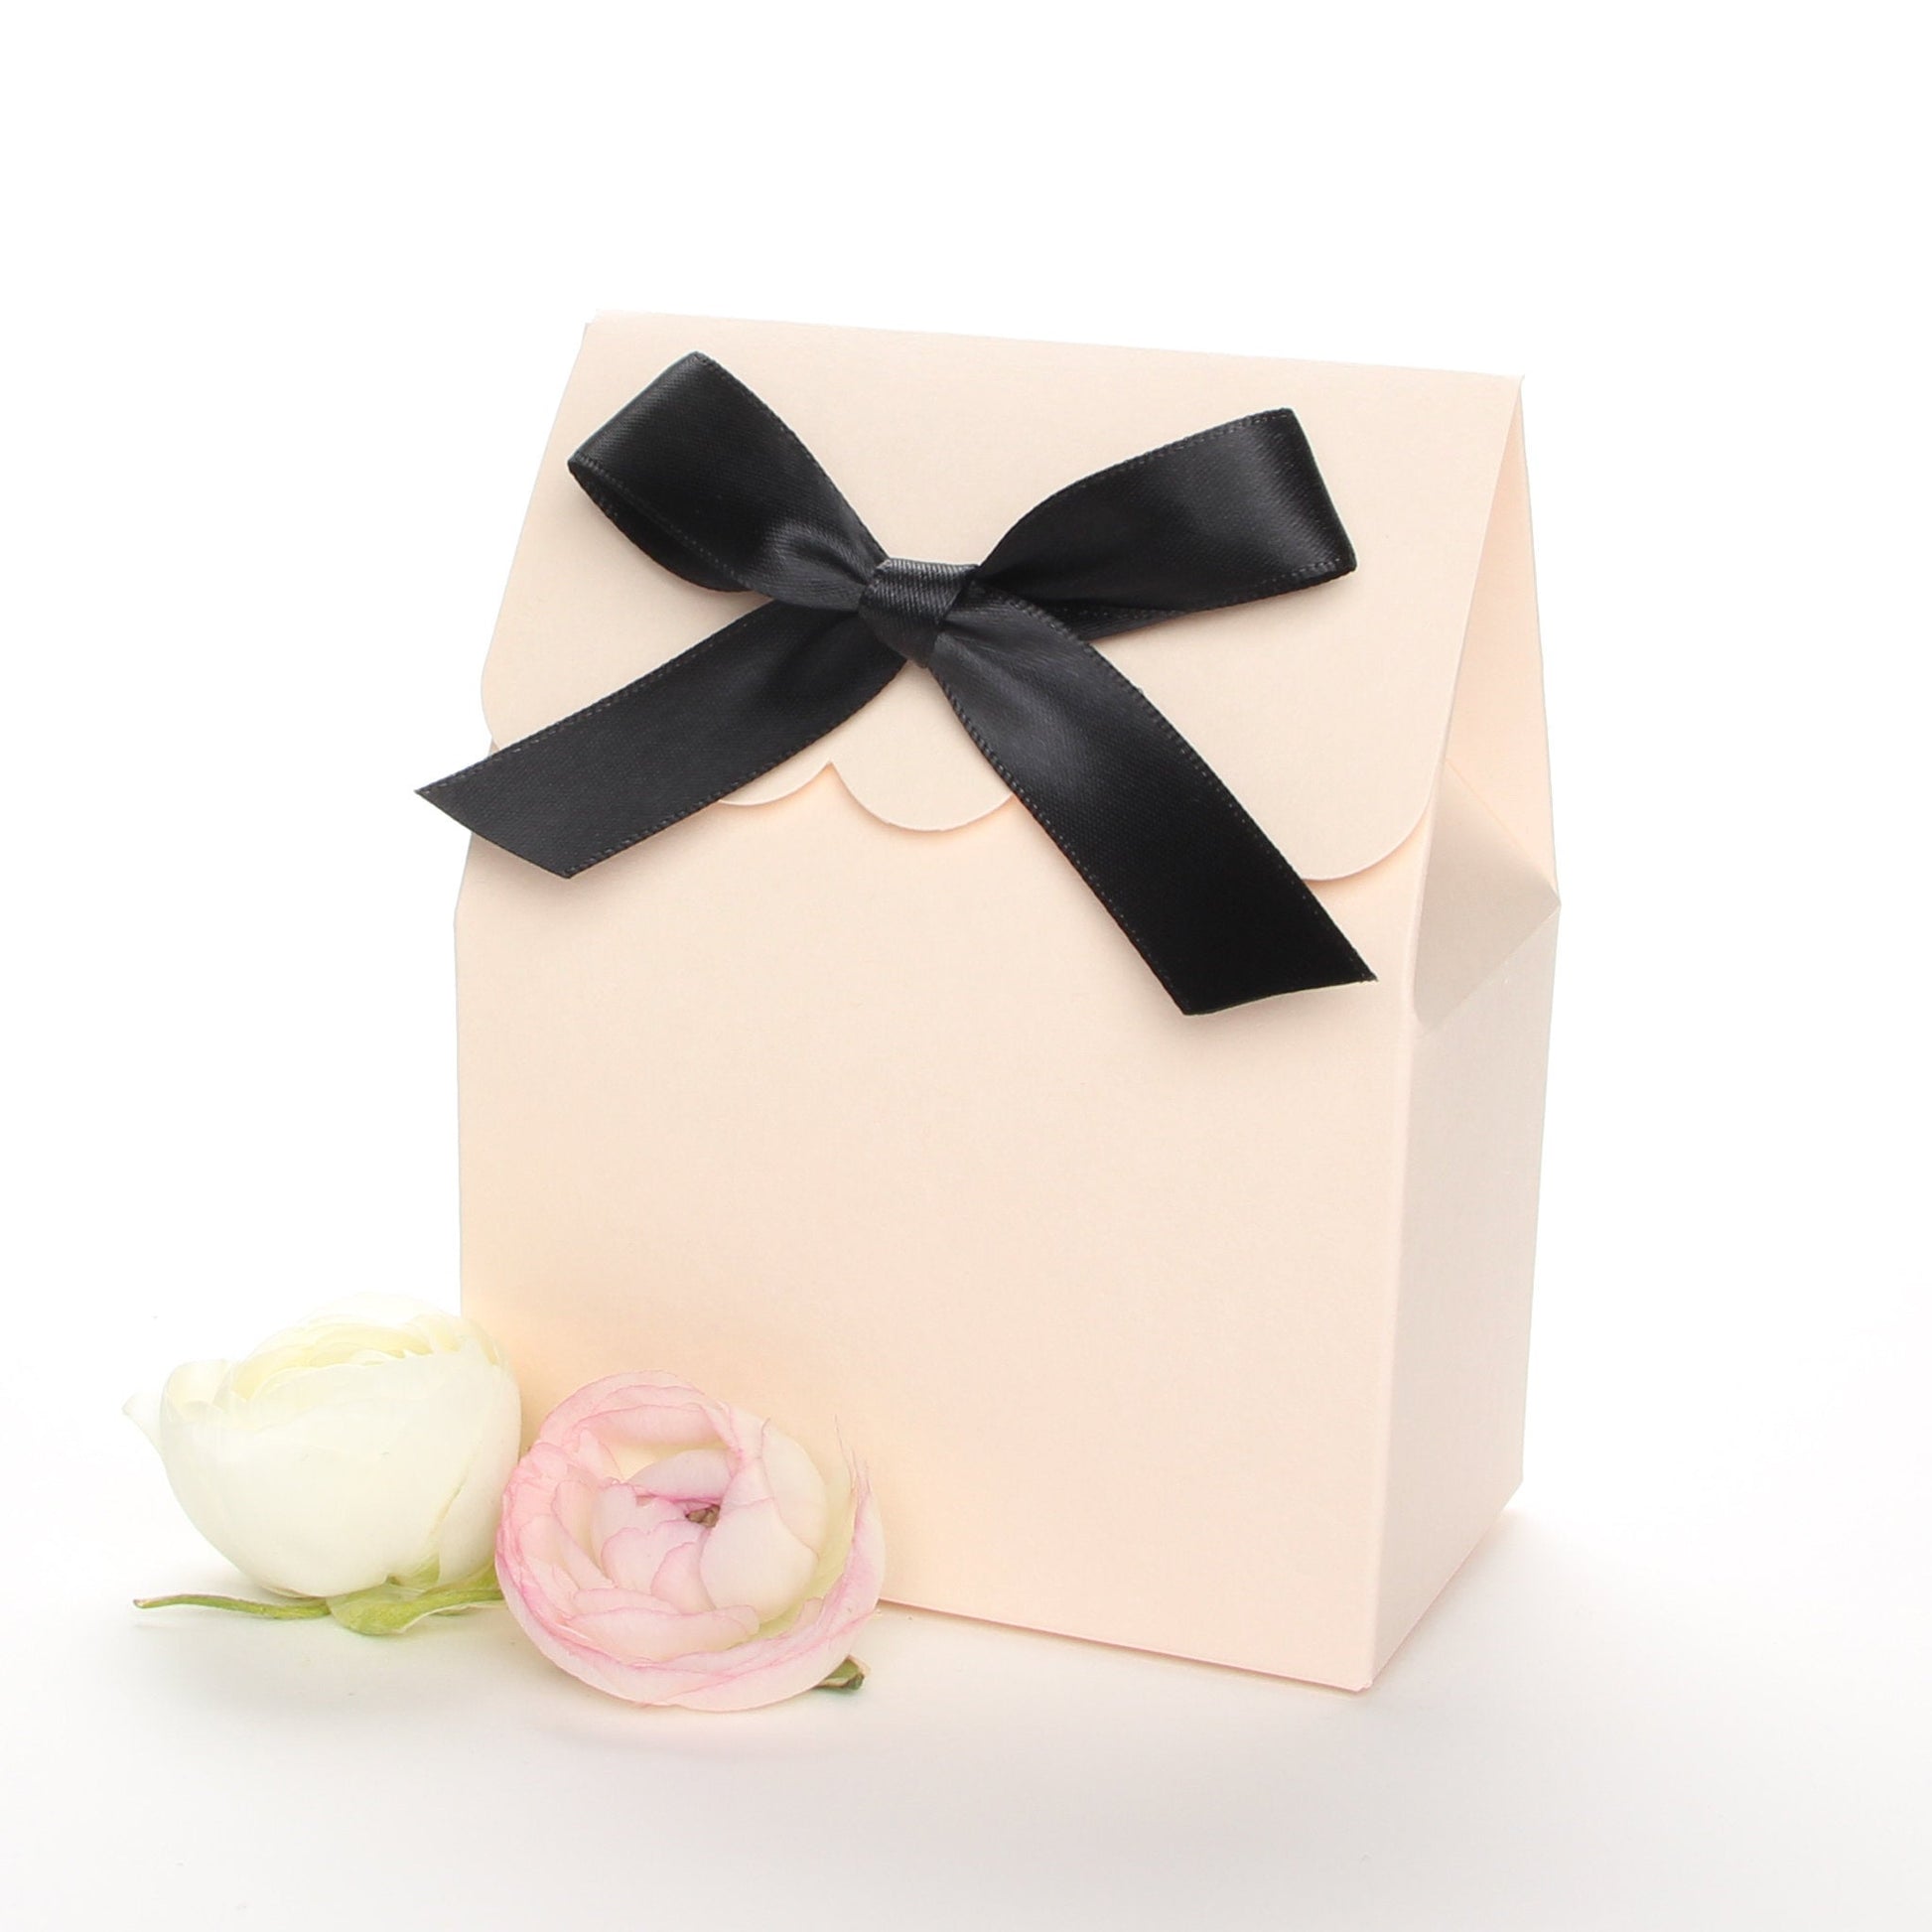 Lux Party’s blush favor box with a scalloped edge and a black bow next to white ranunculus flowers.